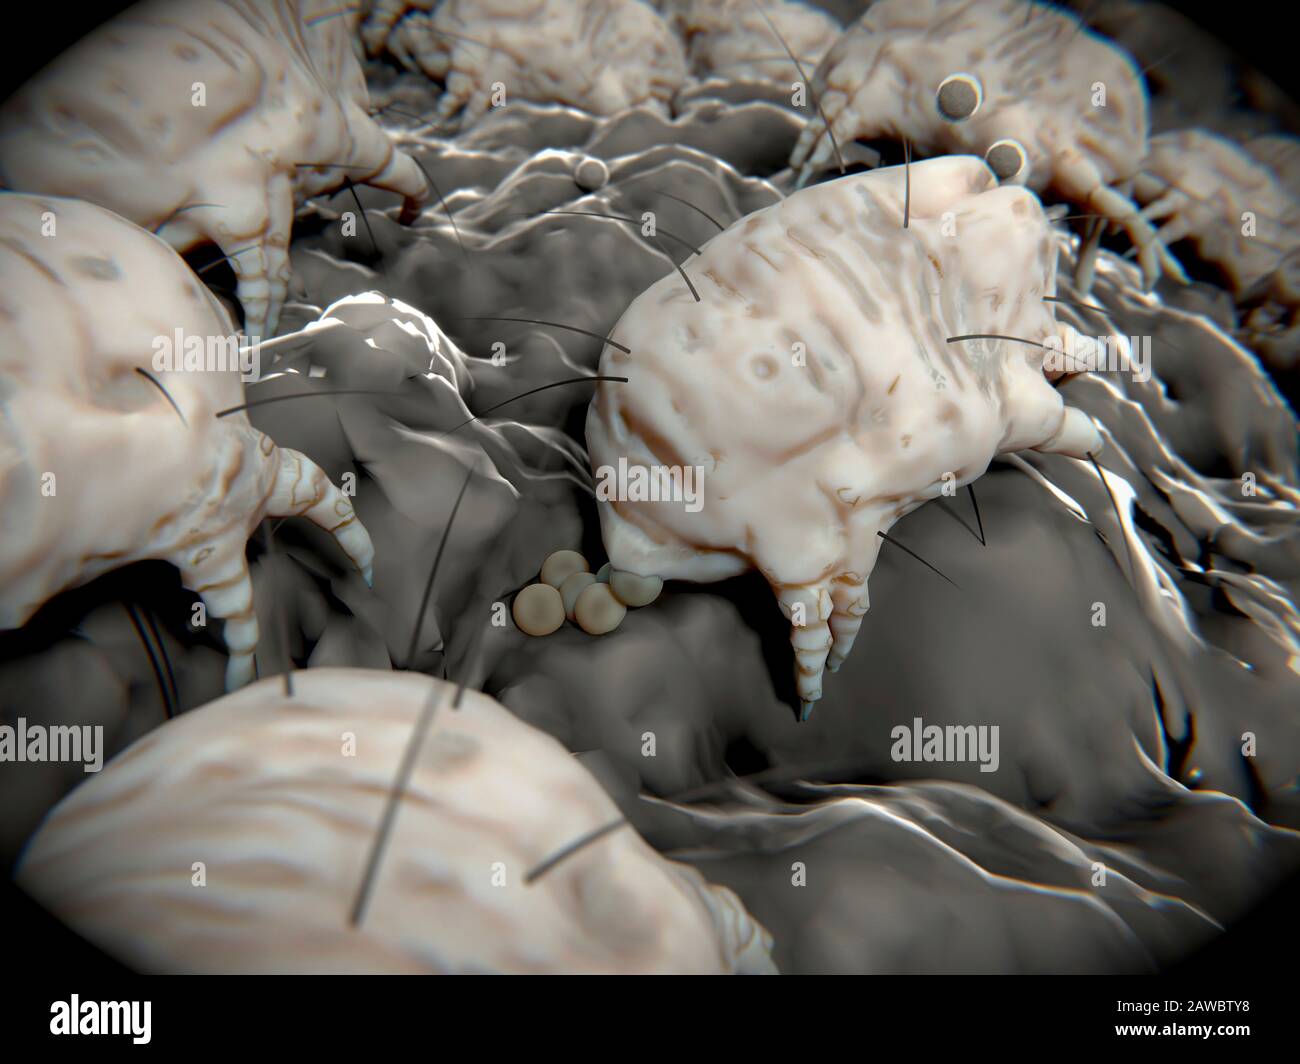 Dust mite laying eggs, illustration Stock Photo